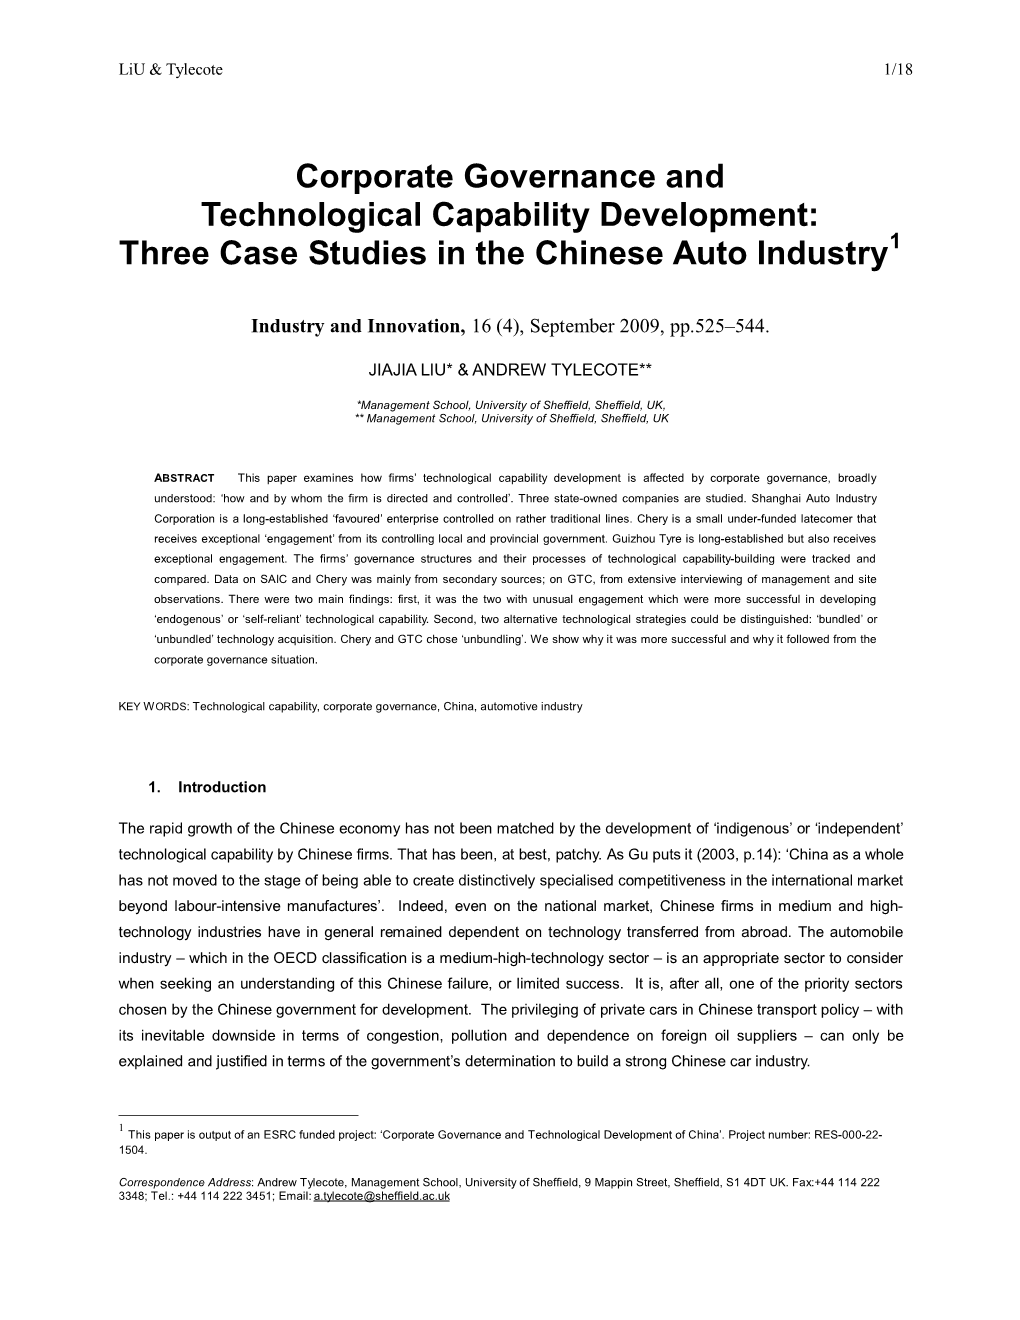 Corporate Governance and Technological Capability Development: Three Case Studies in the Chinese Auto Industry1